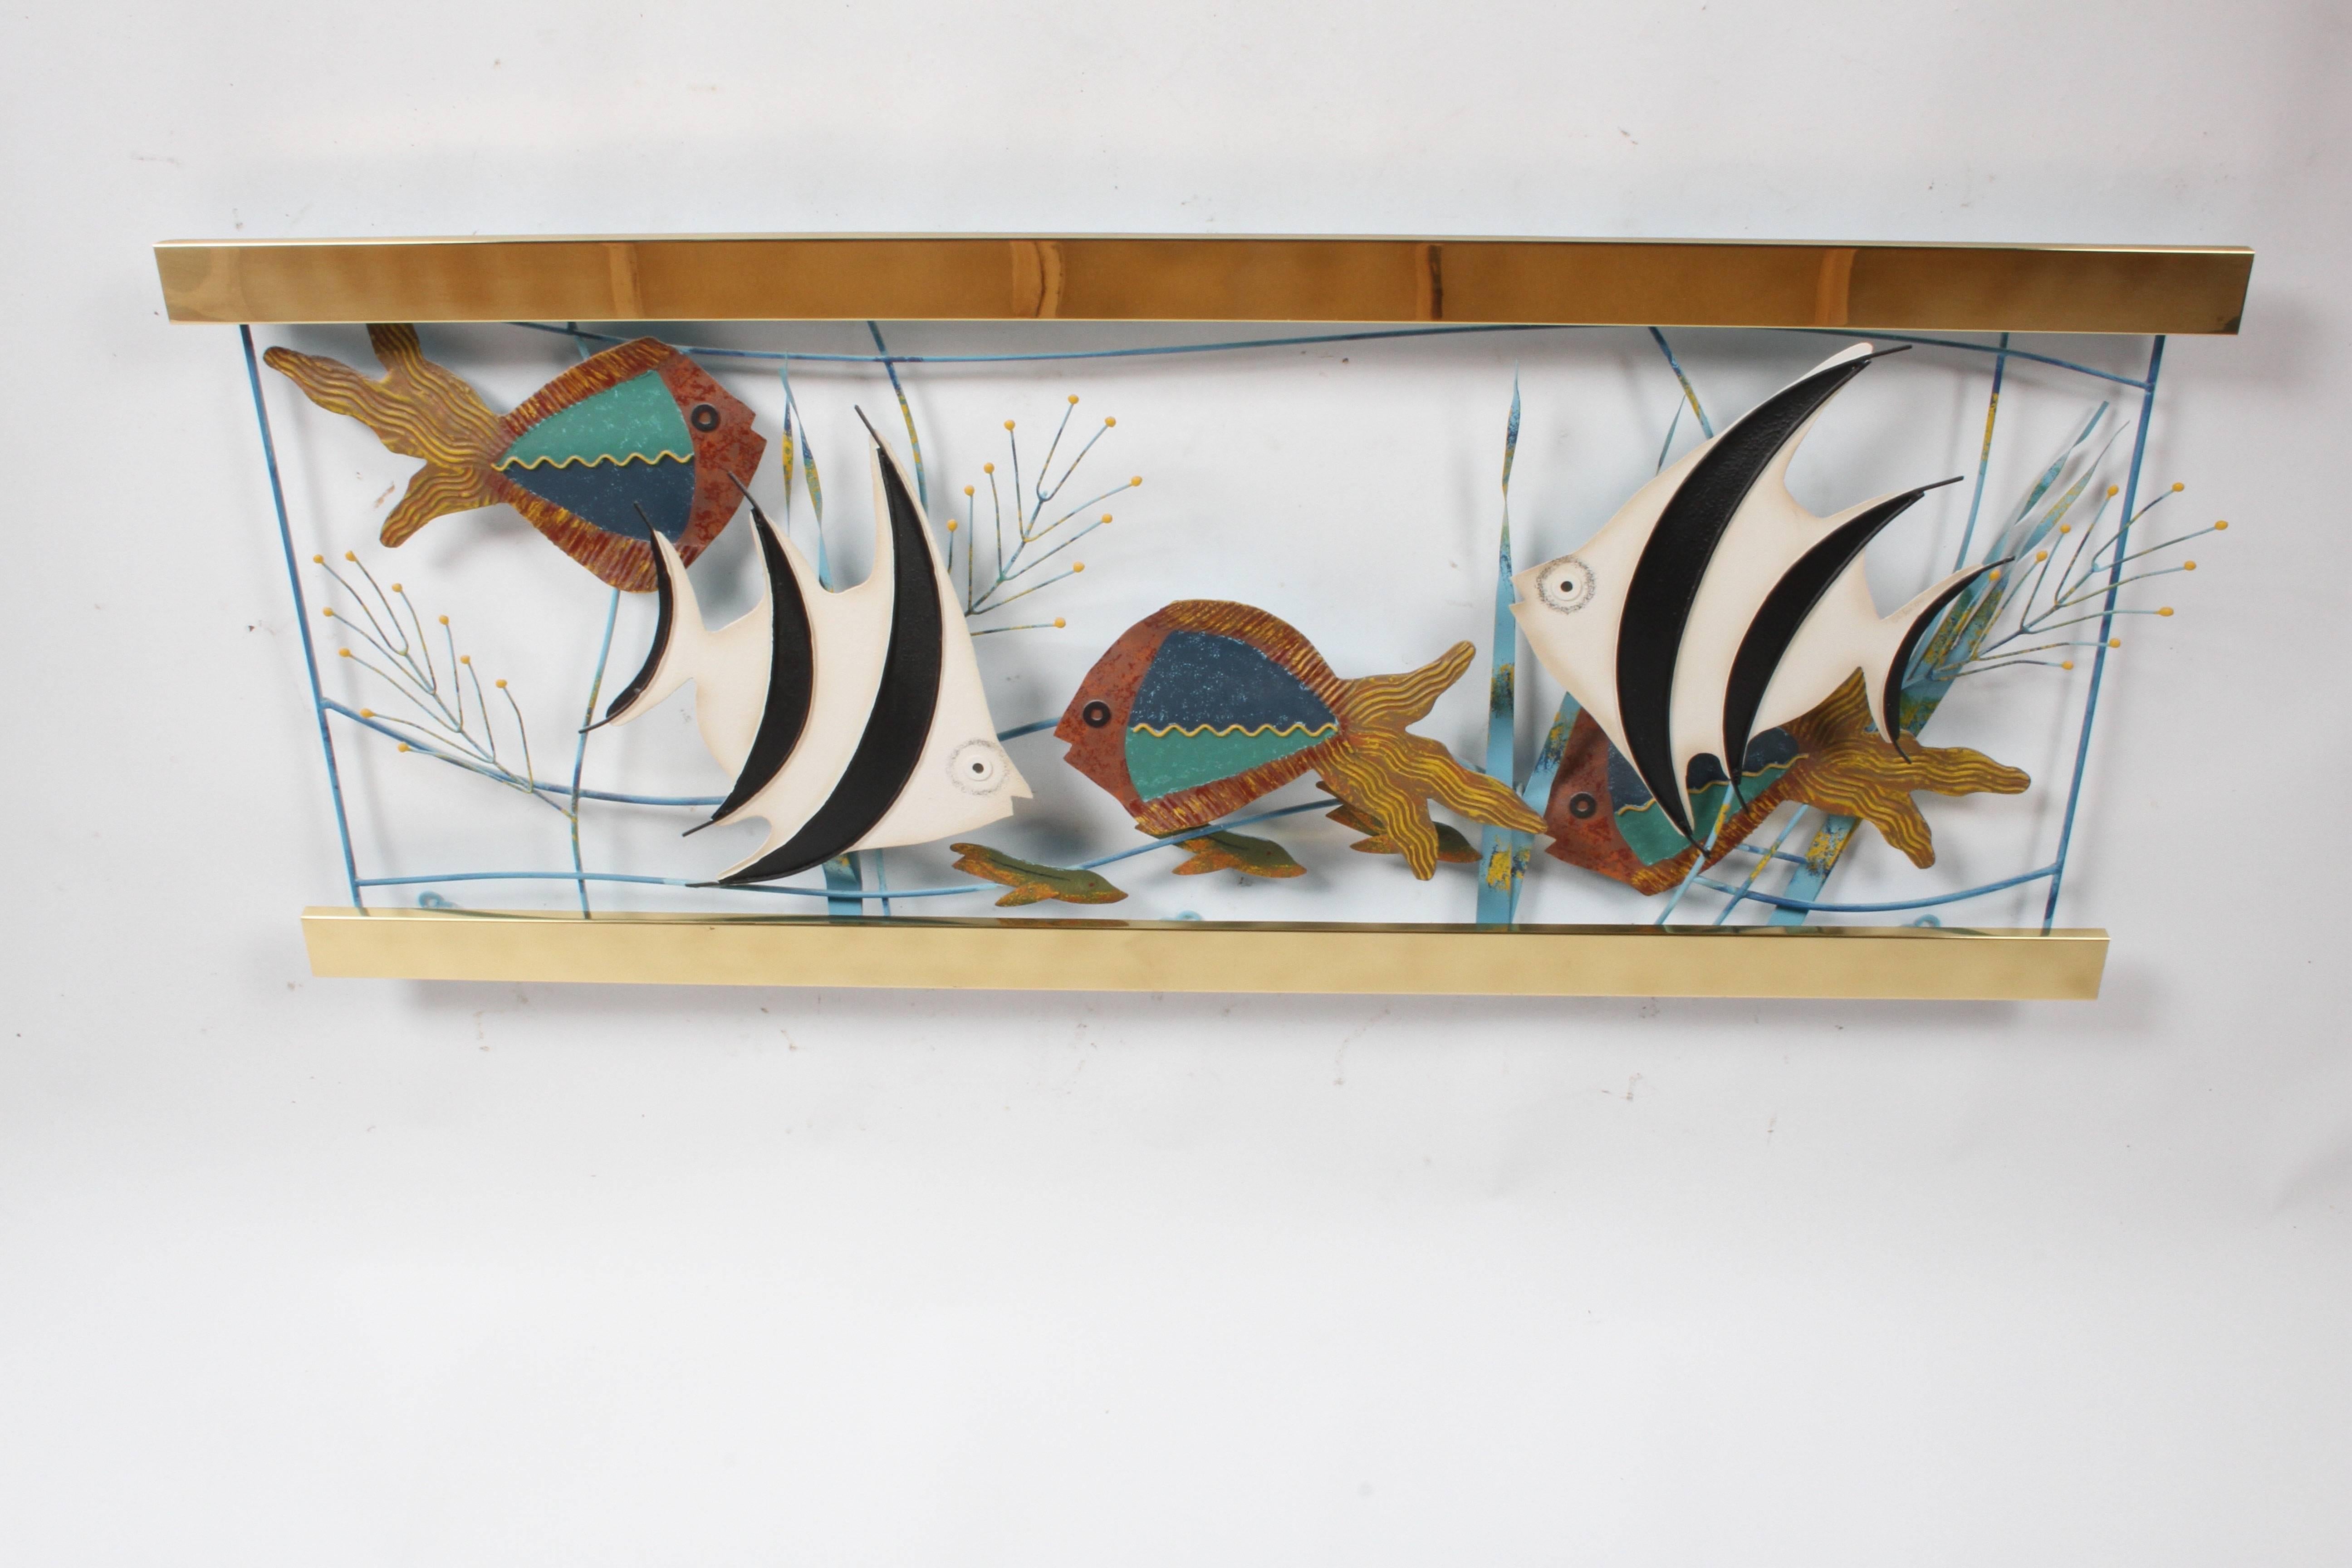 Large Curtis Jere saltwater fish aquarium wall sculpture with brass frame and colorful painted fish. Signed C. Jere 1993. Very nice condition. Brass frames sits 2.5